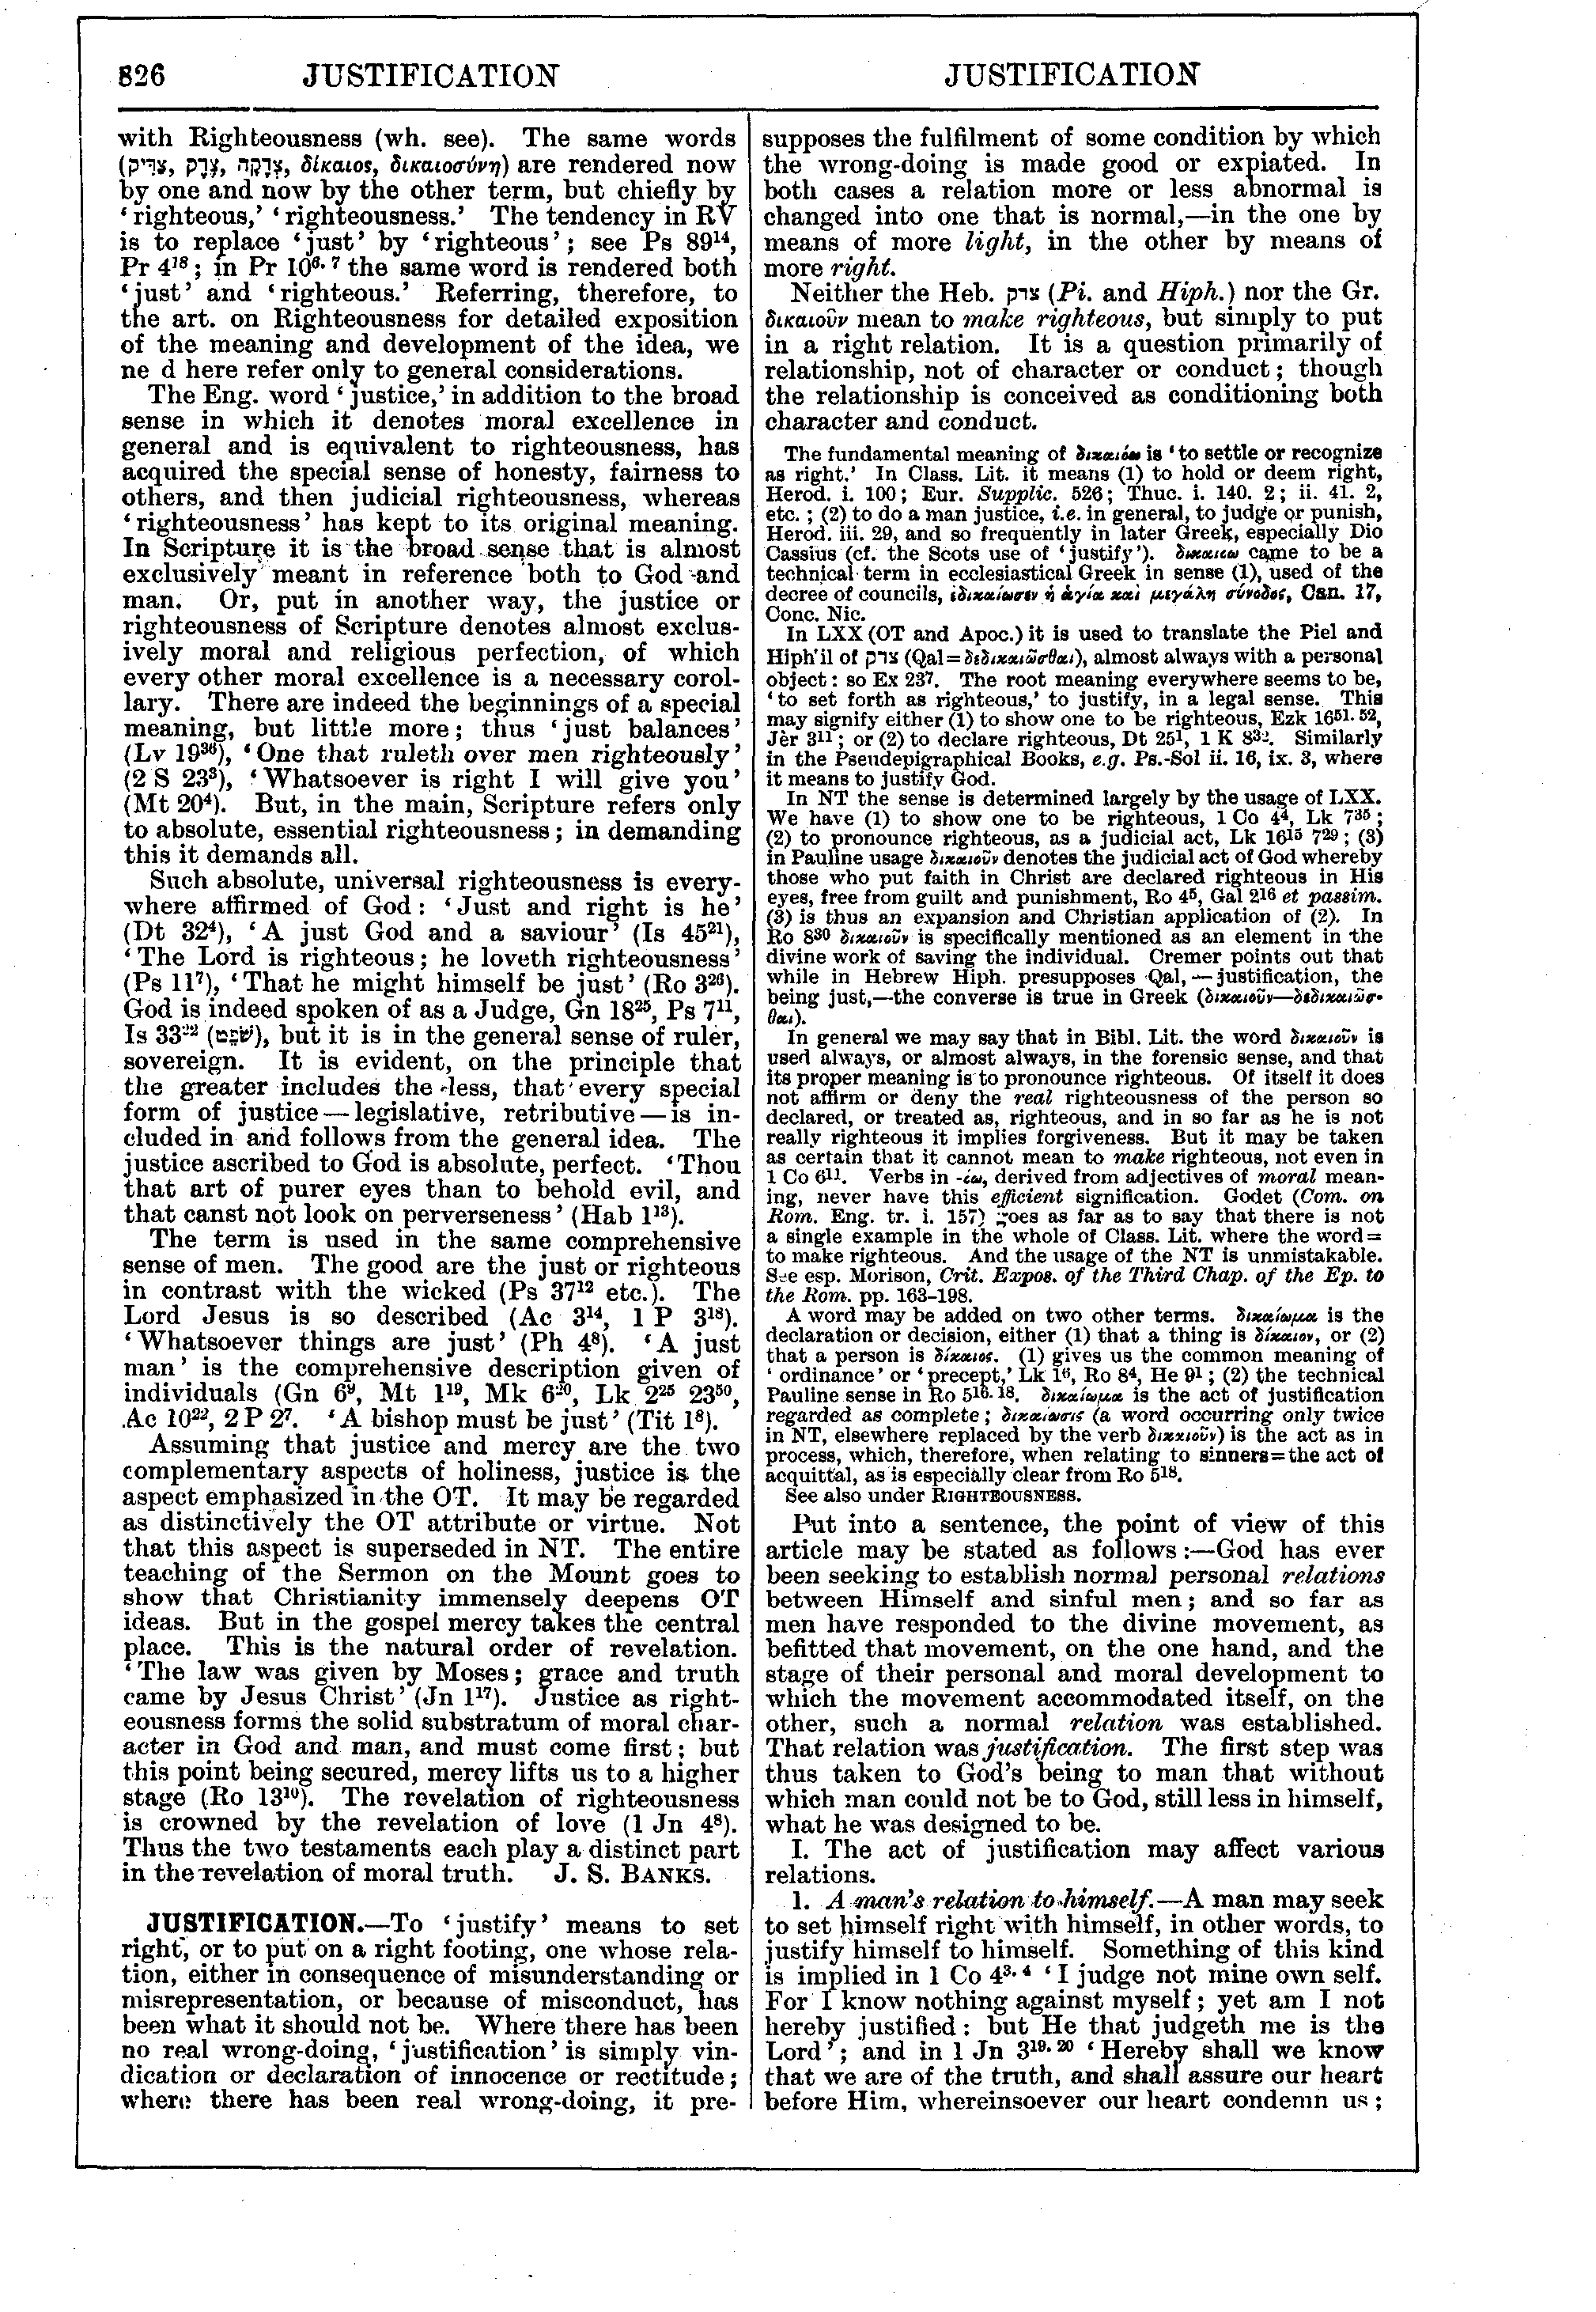 Image of page 826